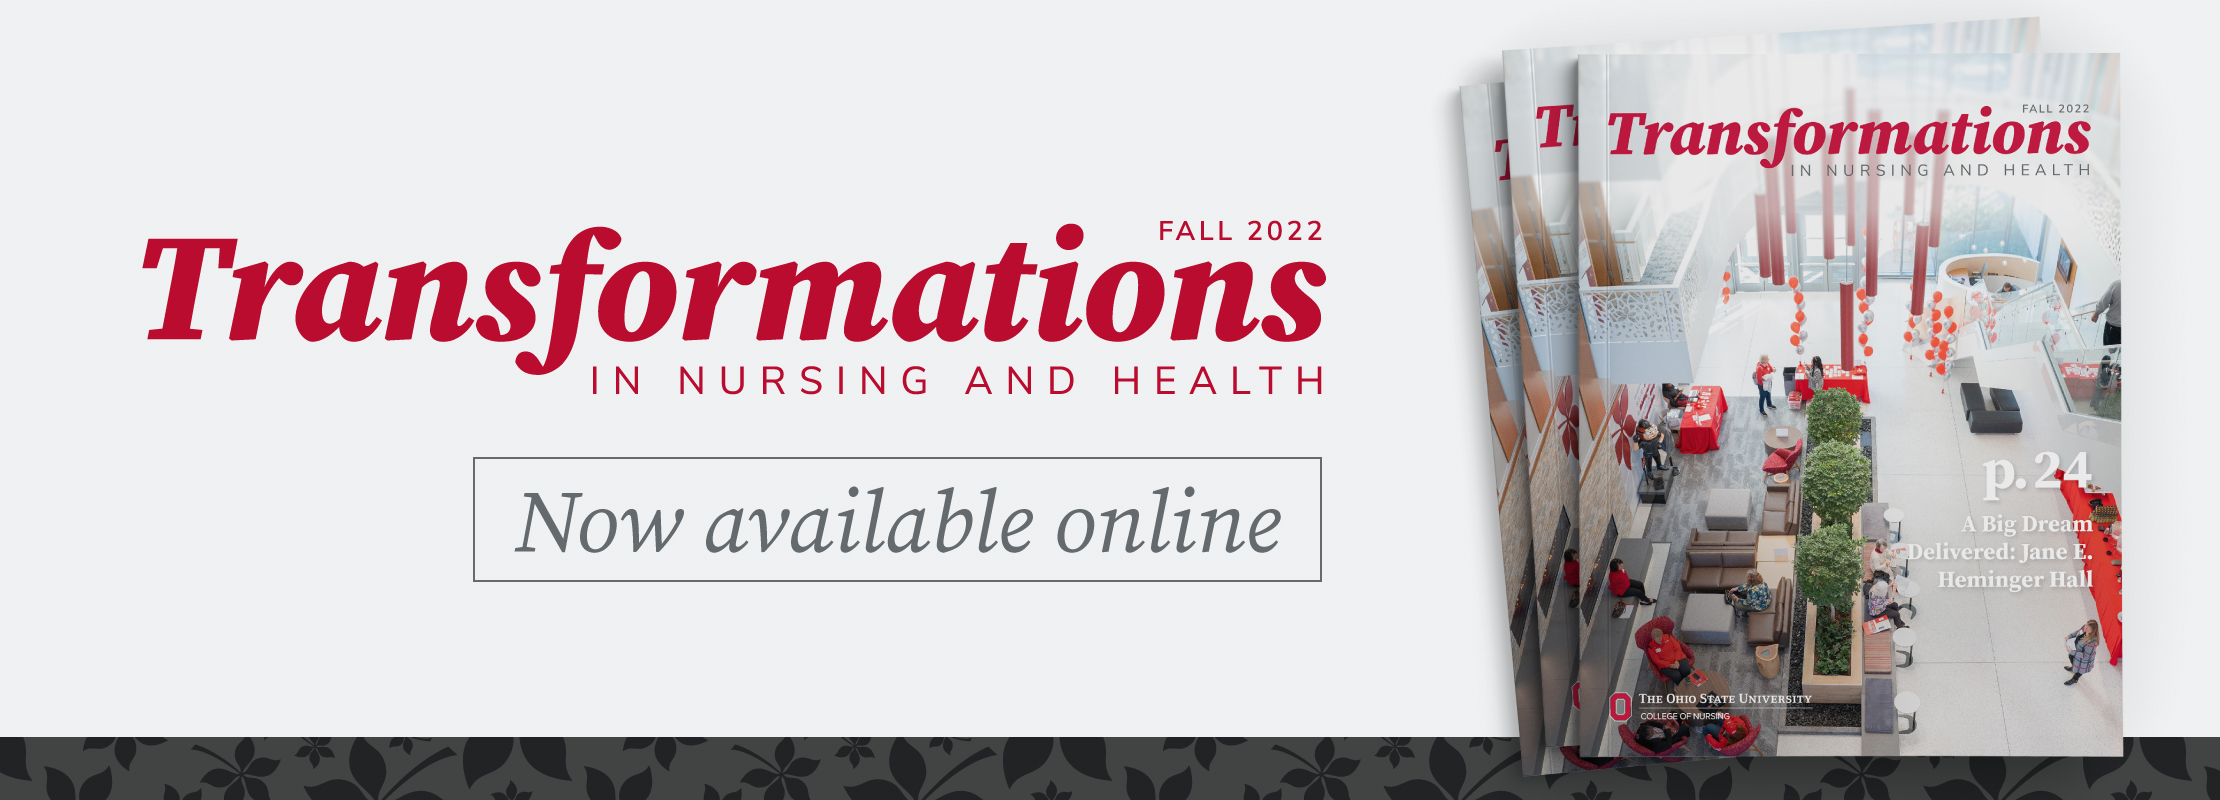 Transformations Fall 2022 now available online